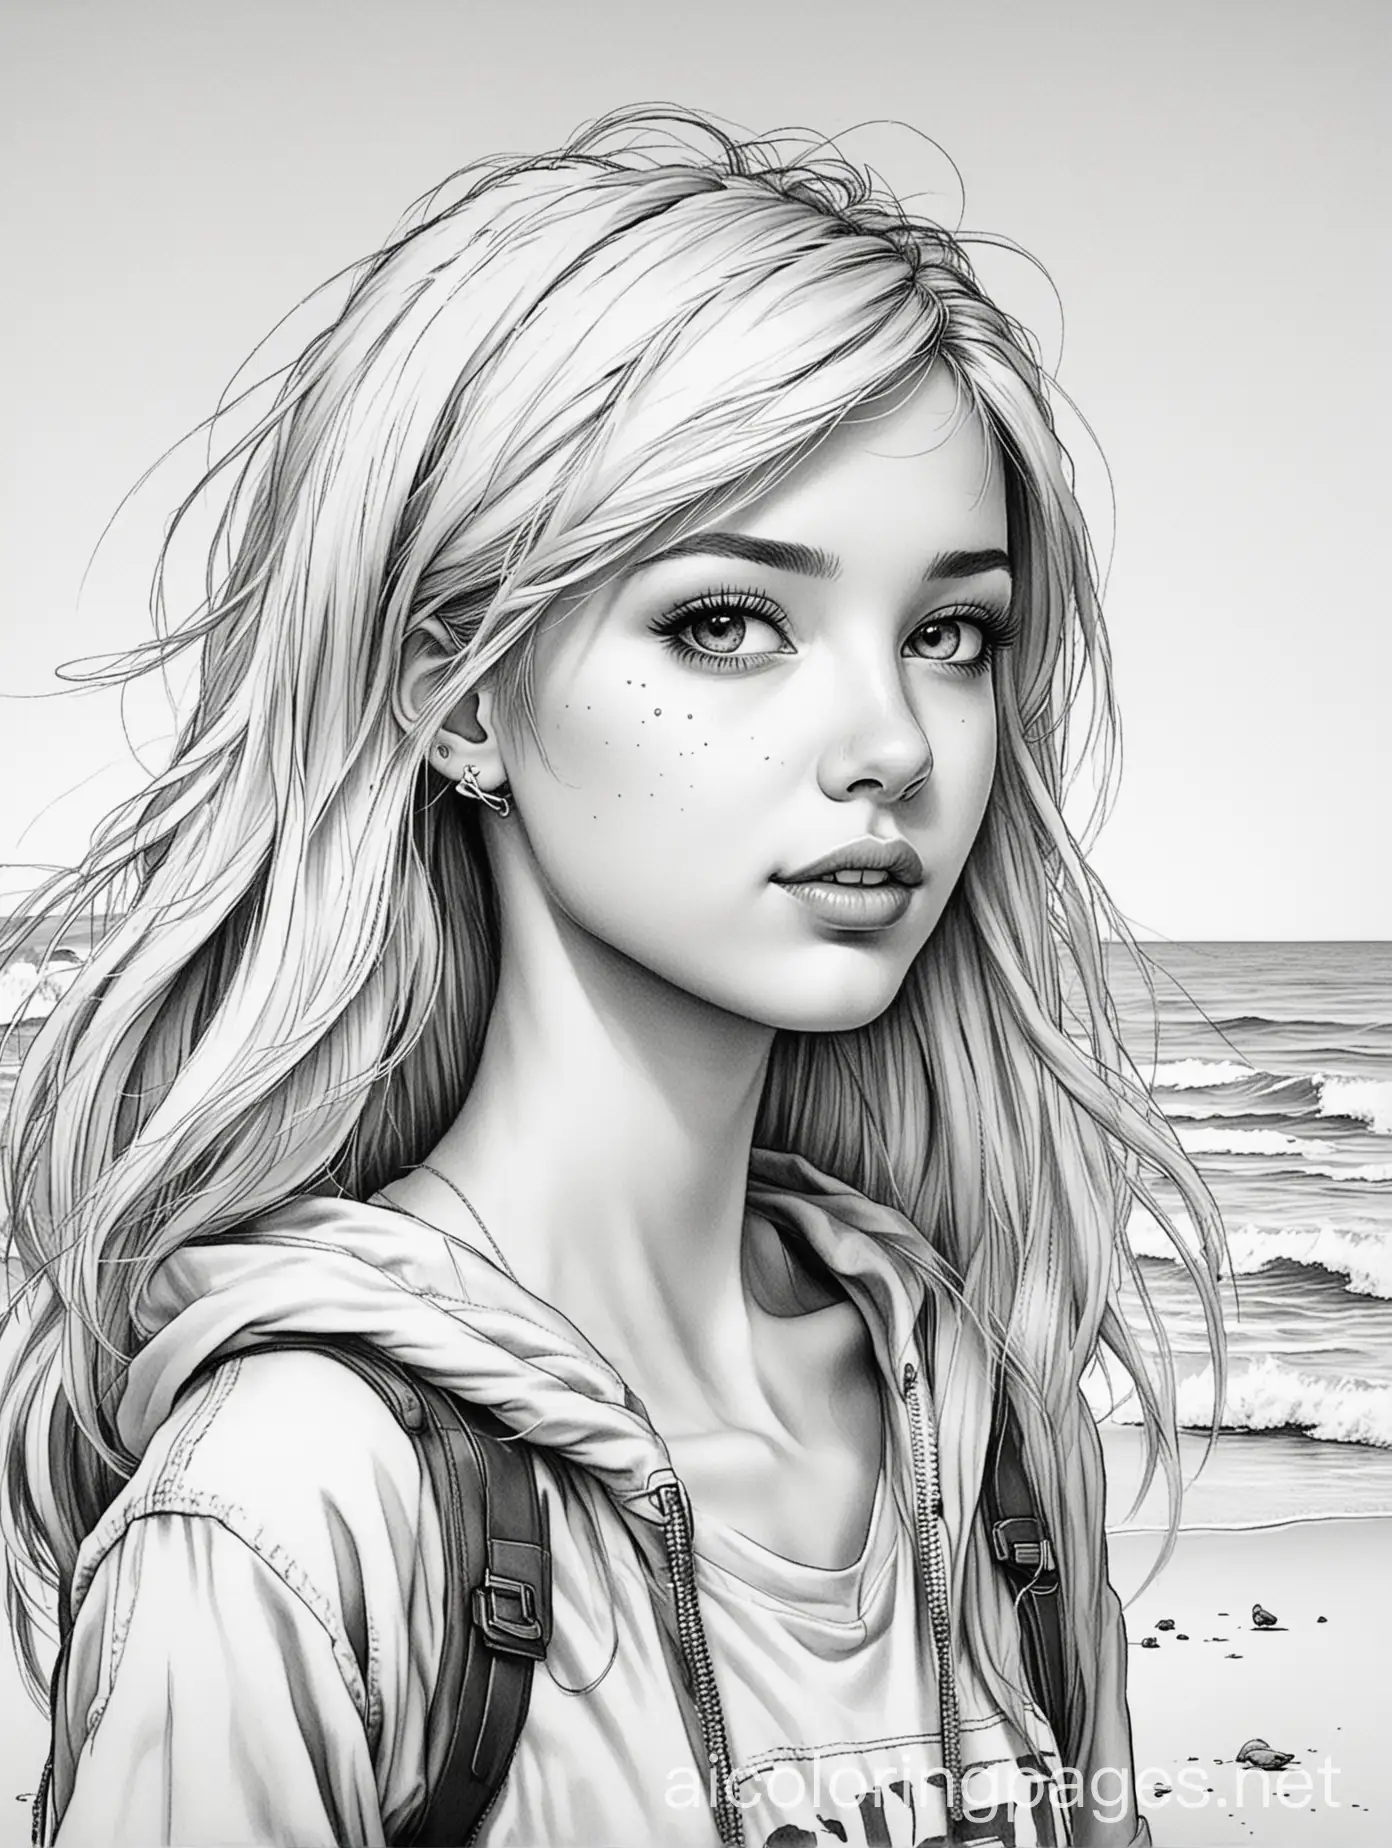 teenager interests, coloring pages art, black and white, line art, white background, ample white space, sci-fi, light hair, pop music, sports, animals, me and my pet, rappers, tomboy, beach party, bad hair day, funny pictures, male art, banksy, Coloring Page, black and white, line art, white background, Simplicity, Ample White Space. The background of the coloring page is plain white to make it easy for young children to color within the lines. The outlines of all the subjects are easy to distinguish, making it simple for kids to color without too much difficulty